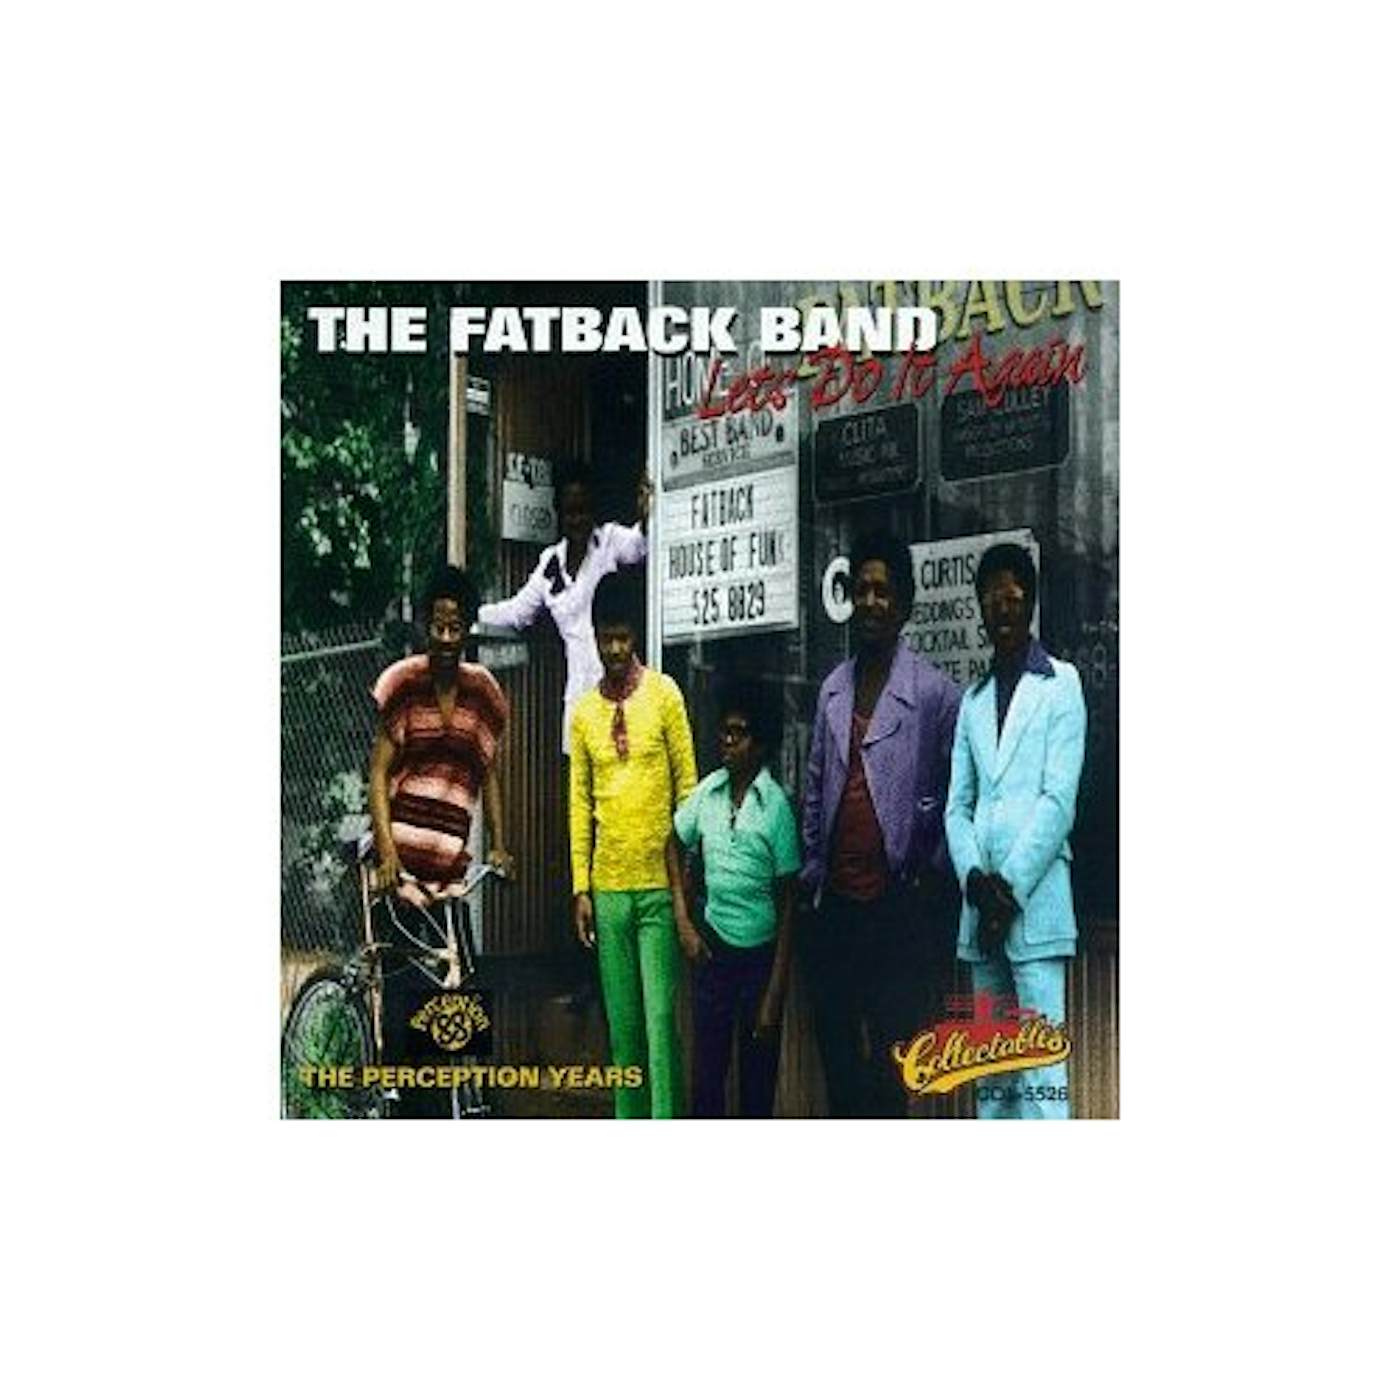 Fatback Band LET'S DO IT AGAIN - PERCEPTION YEARS CD